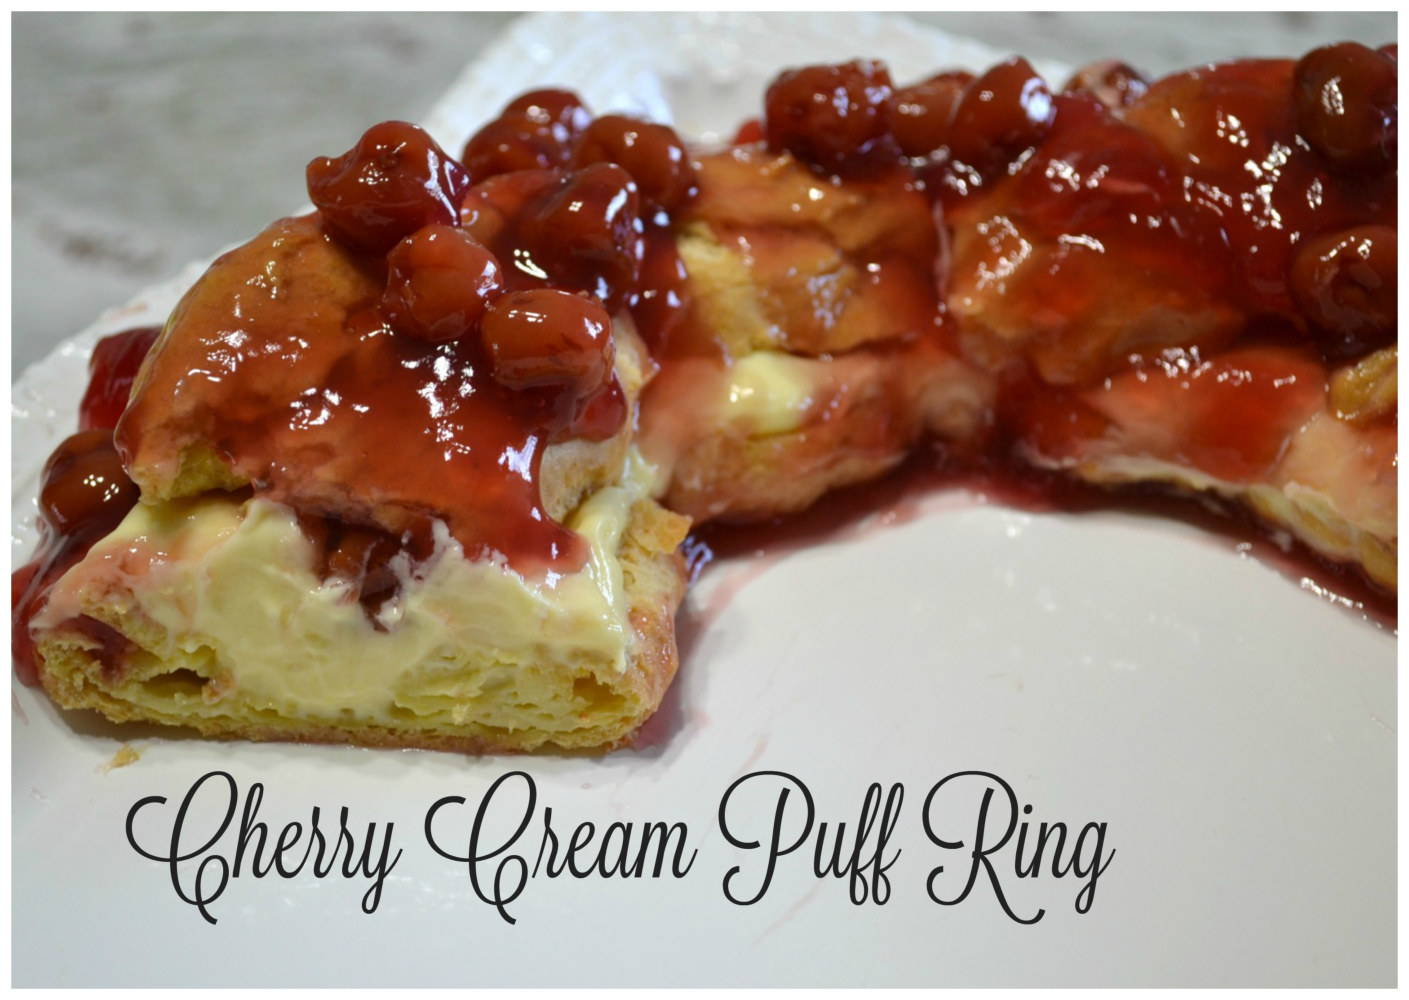 This elegant dessert is a cream puff ring filled with pudding and cherry pie filling.